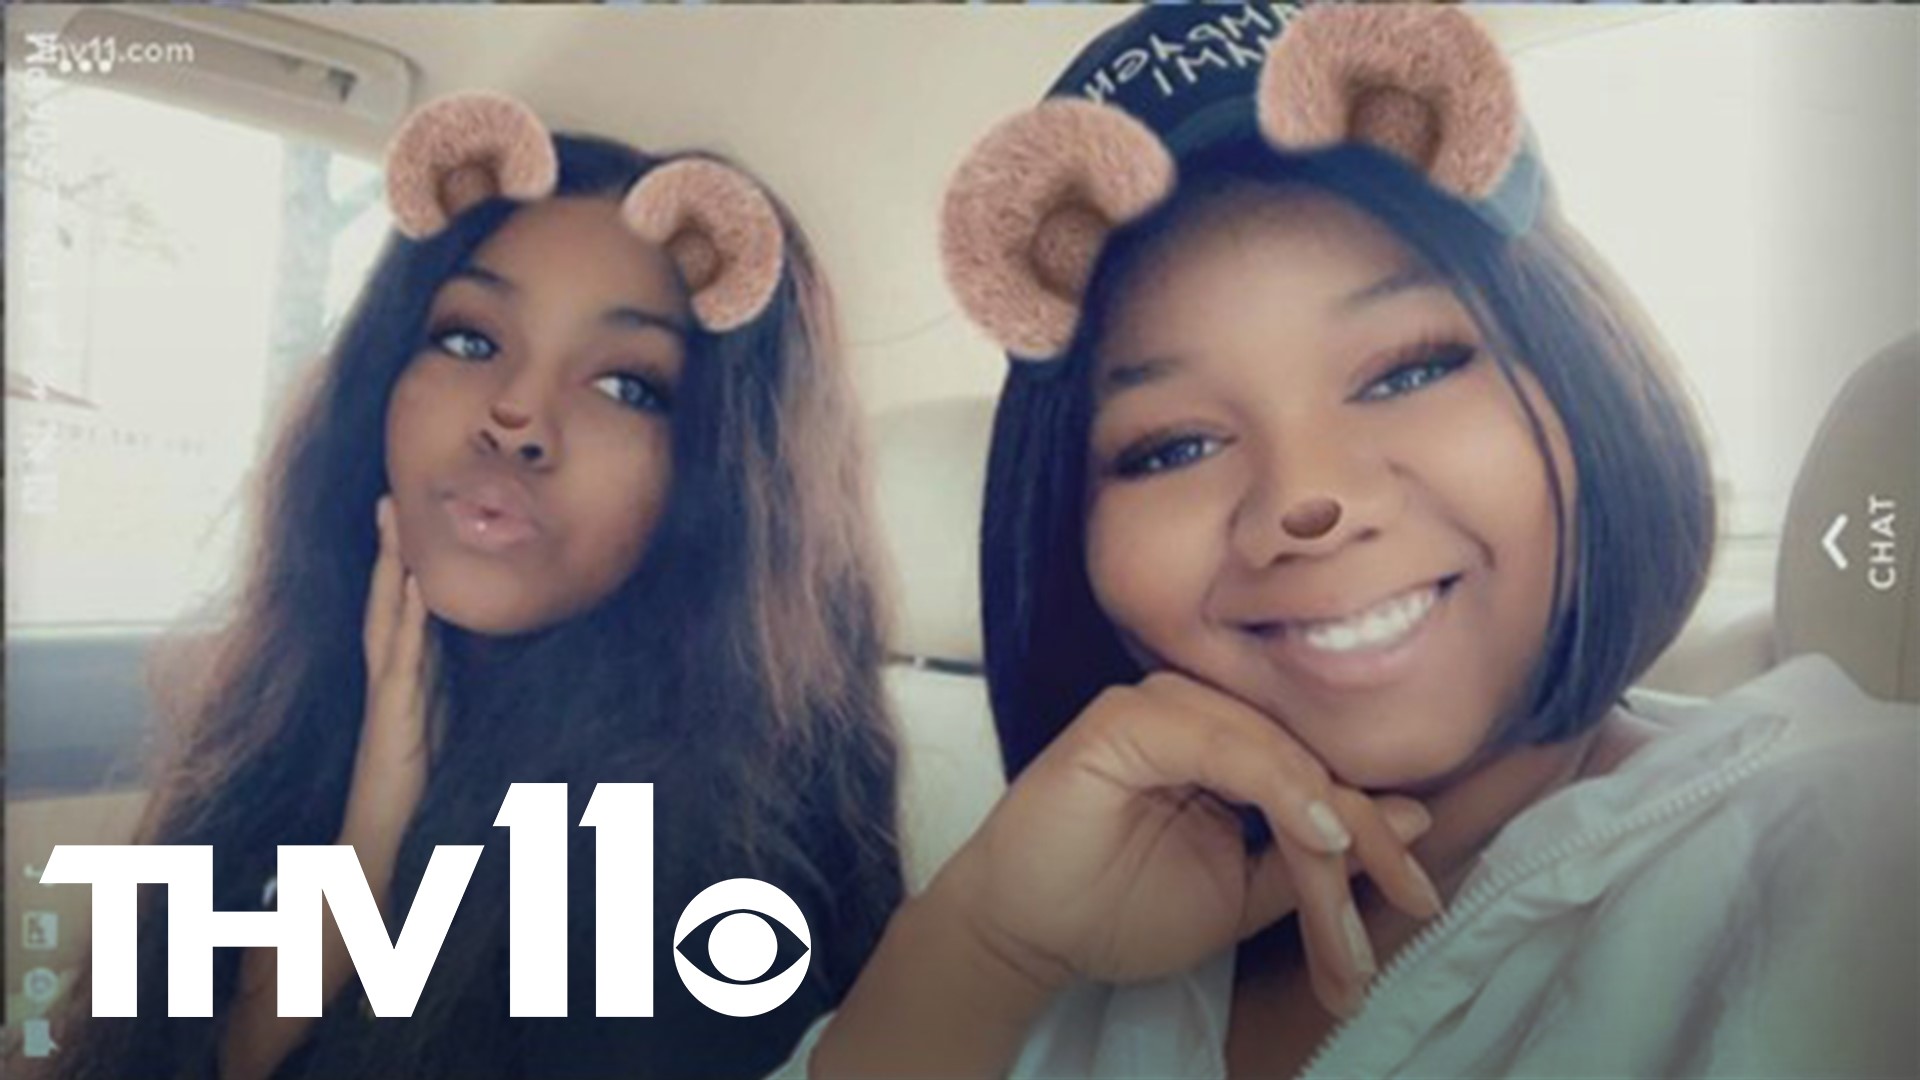 It's been two years since 21-year-old I'Quira Tate and 24-year-old Brittany Tate both died in a double shooting on South Ringo Street in Little Rock.